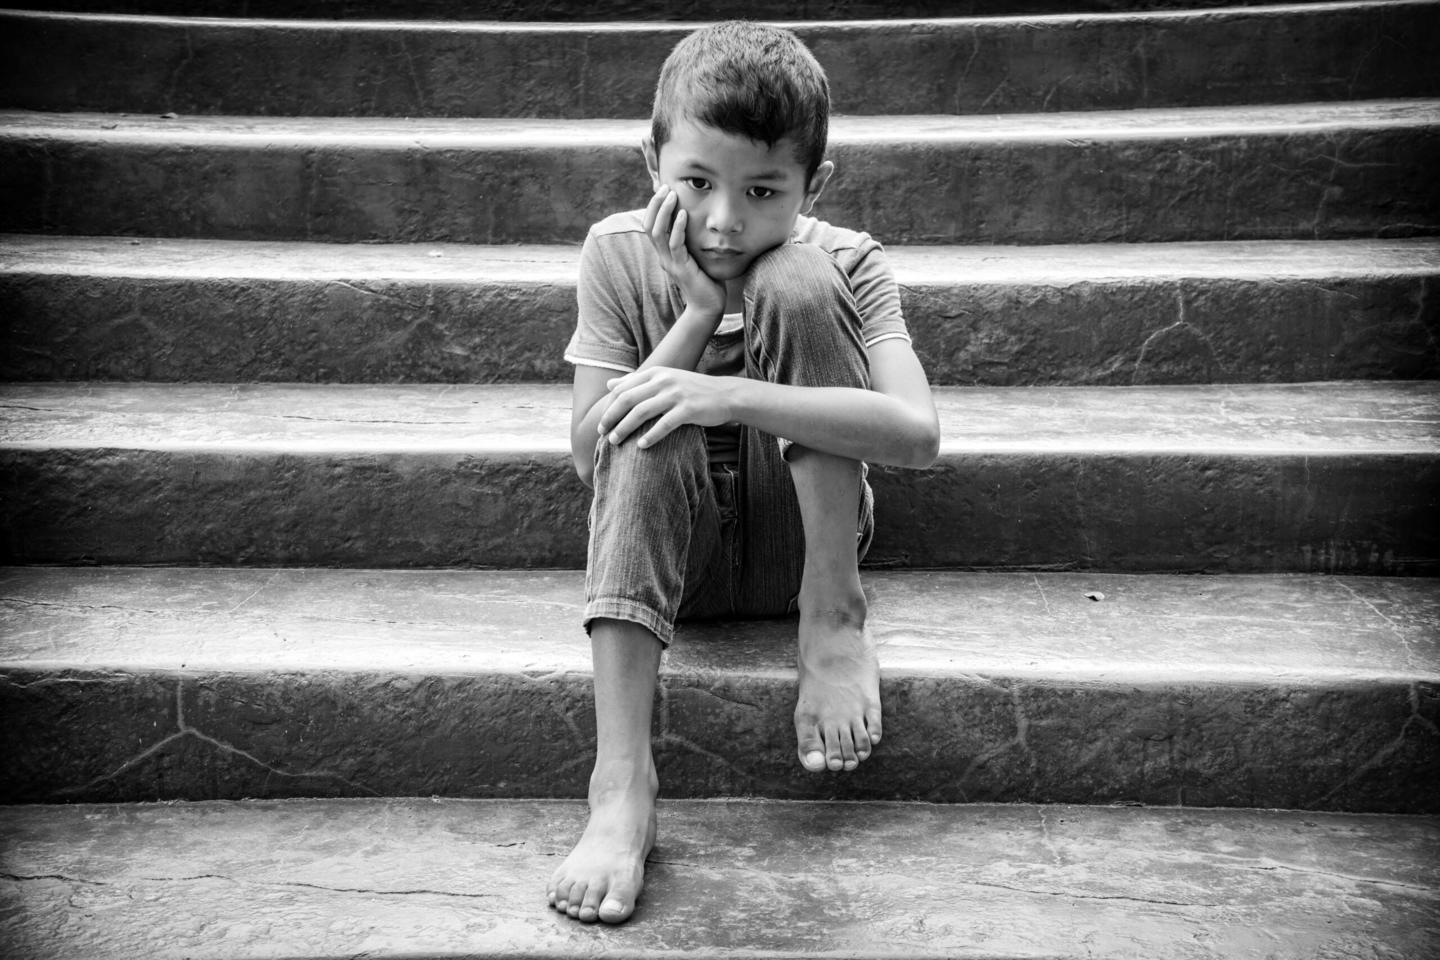 A child with no shoes sits on steps